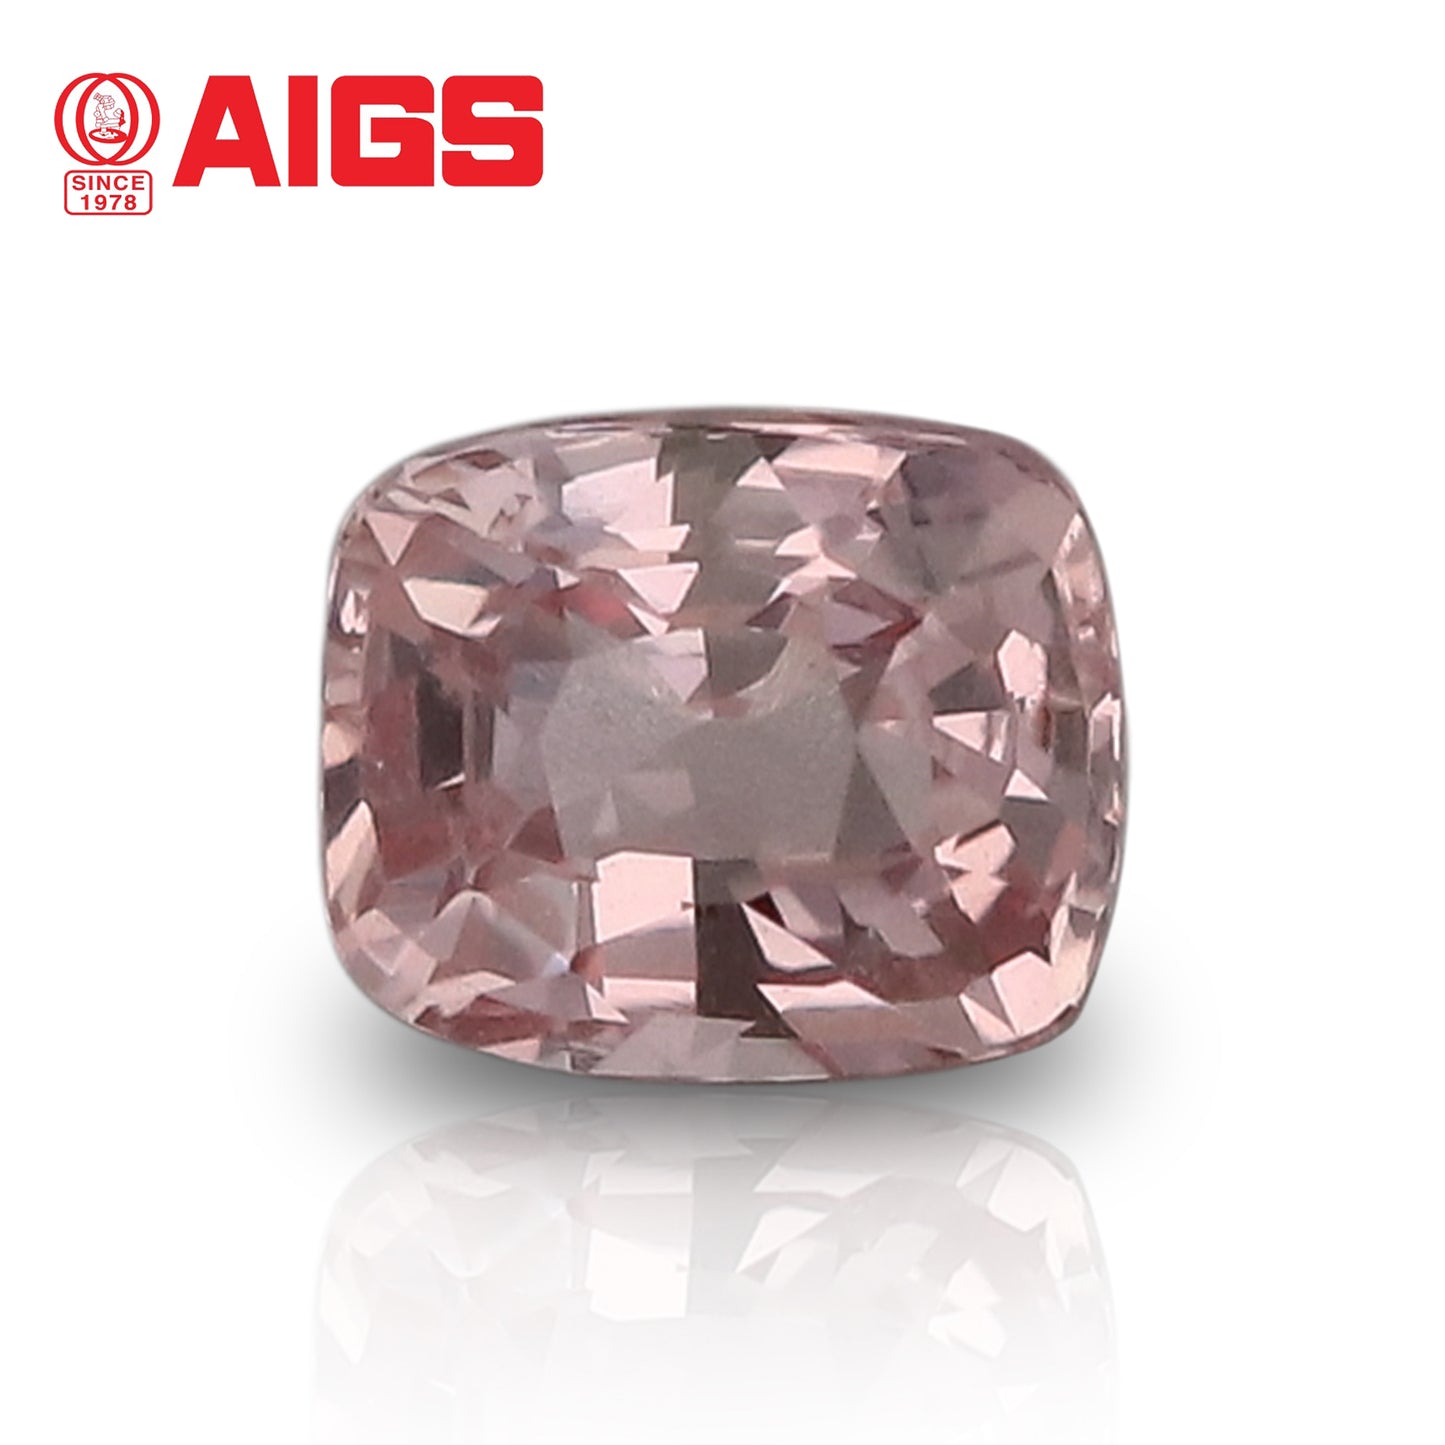 Natural Unheated Padparadscha Sapphire 1.03 Carats with AIGS Report